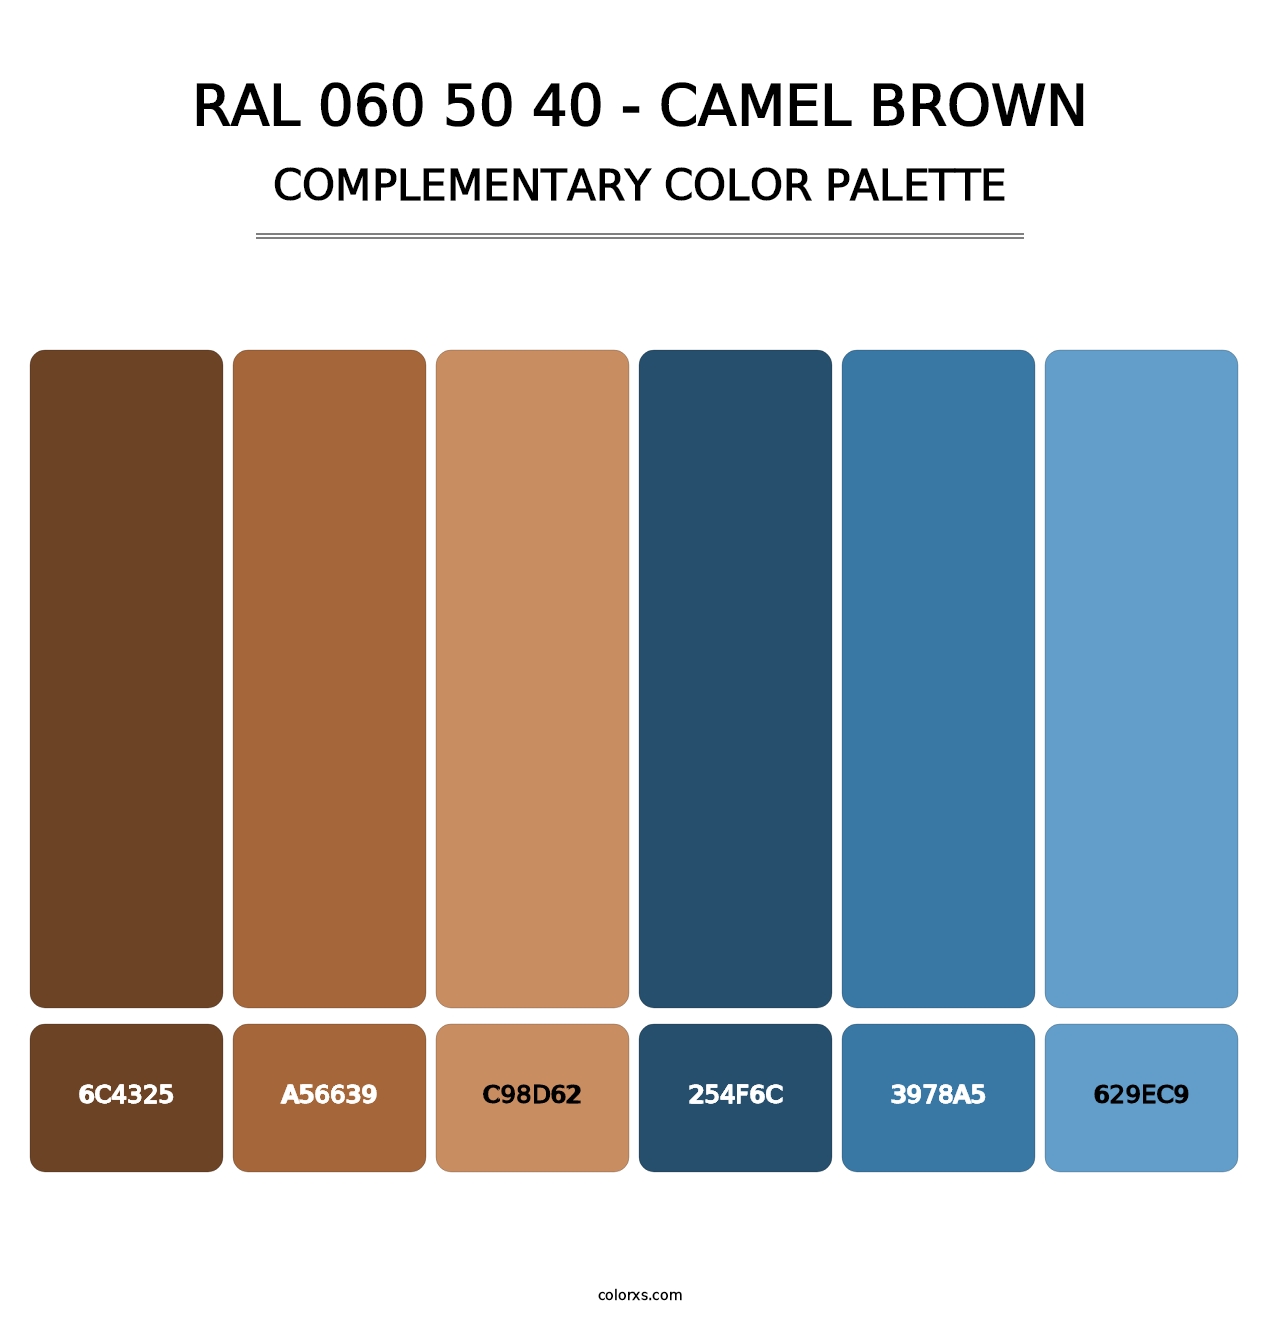 RAL 060 50 40 - Camel Brown - Complementary Color Palette